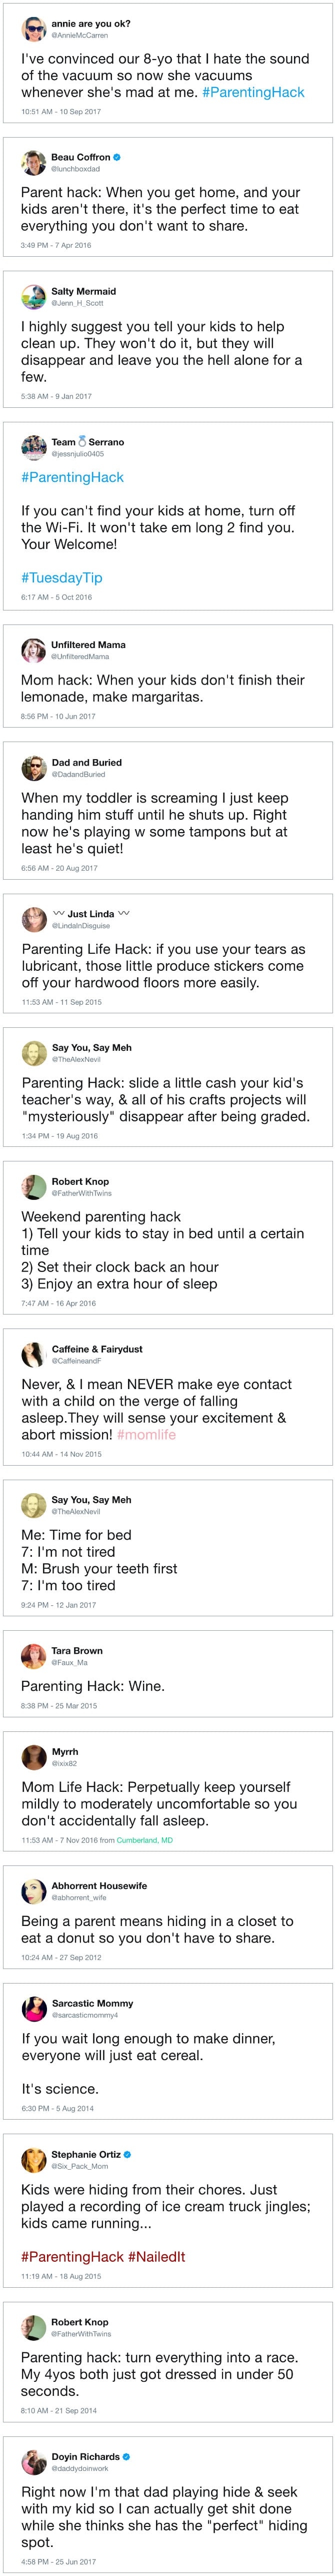 Brilliant parenting hacks from desperate moms and dads